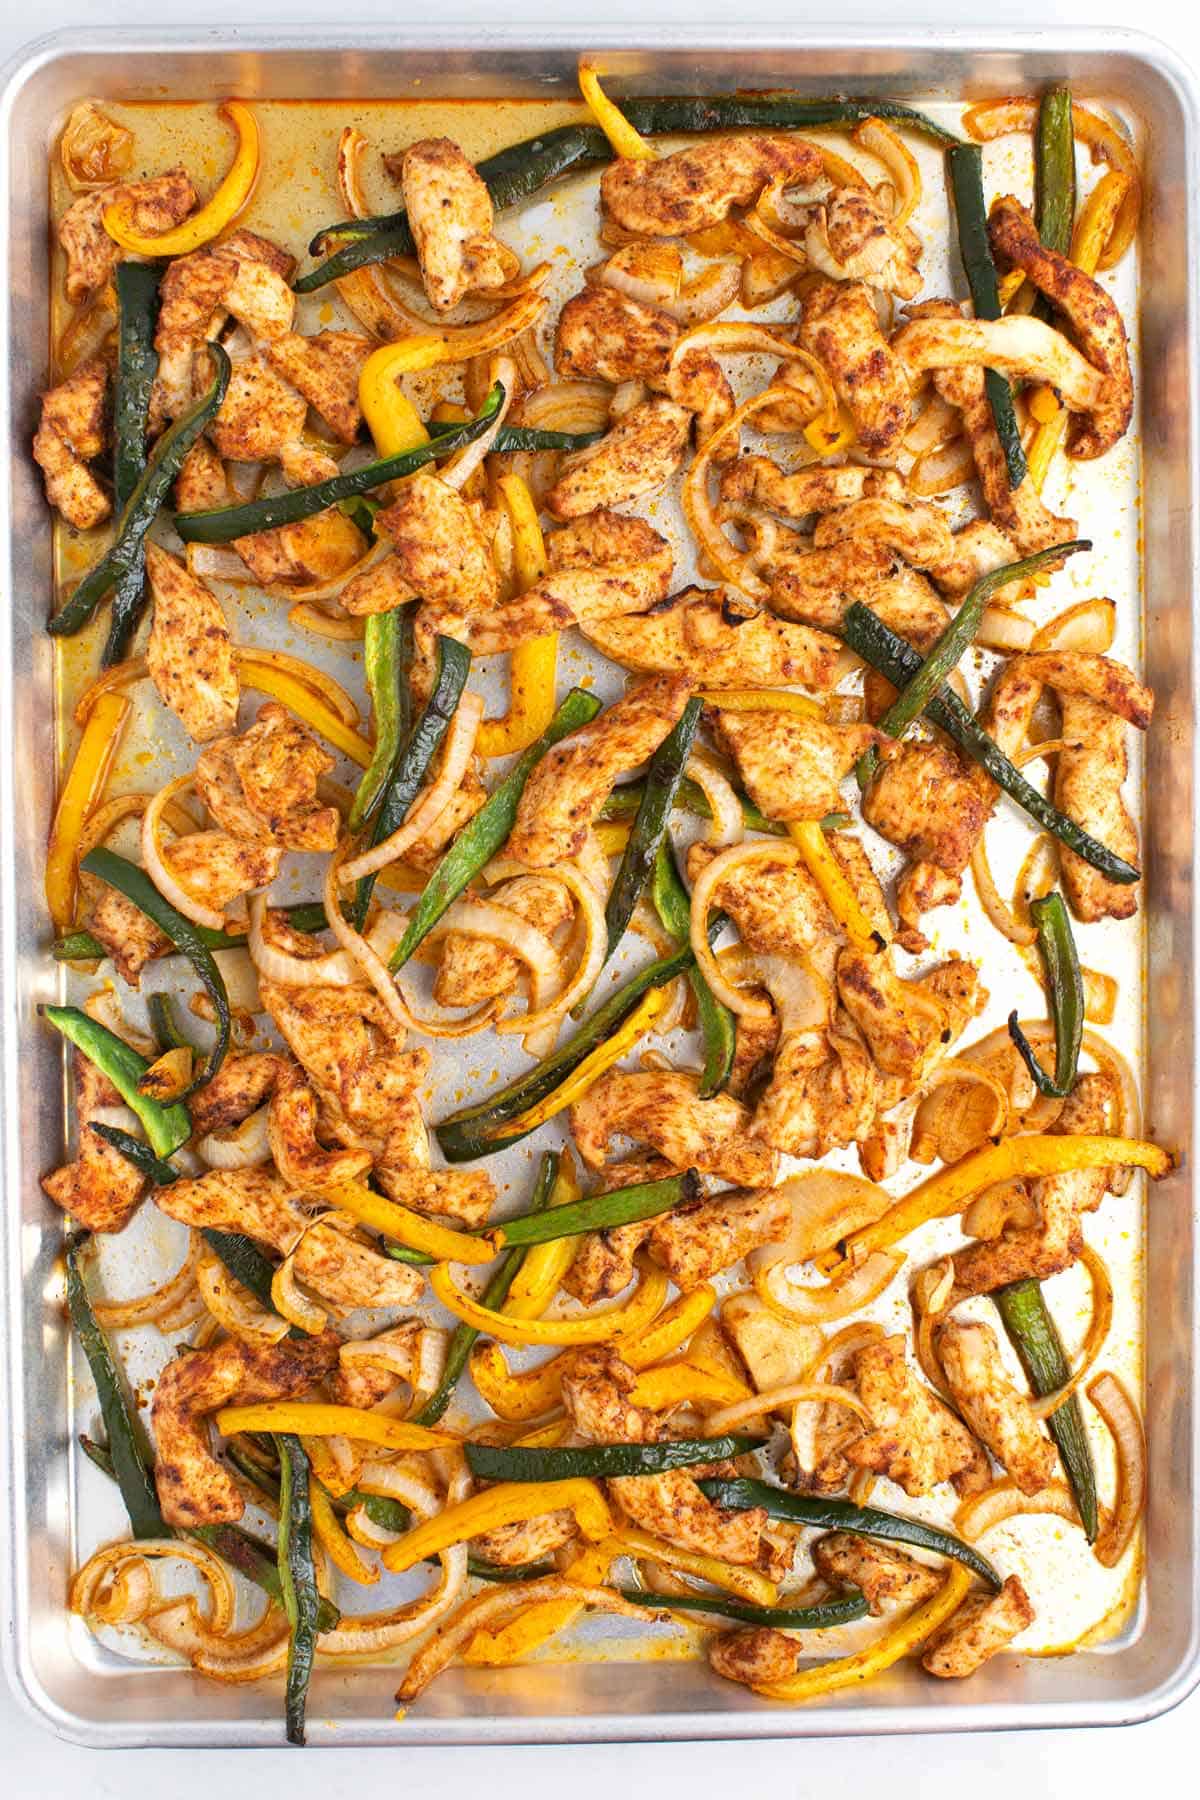 Cooked sliced chicken and peppers on a large silver baking sheet.